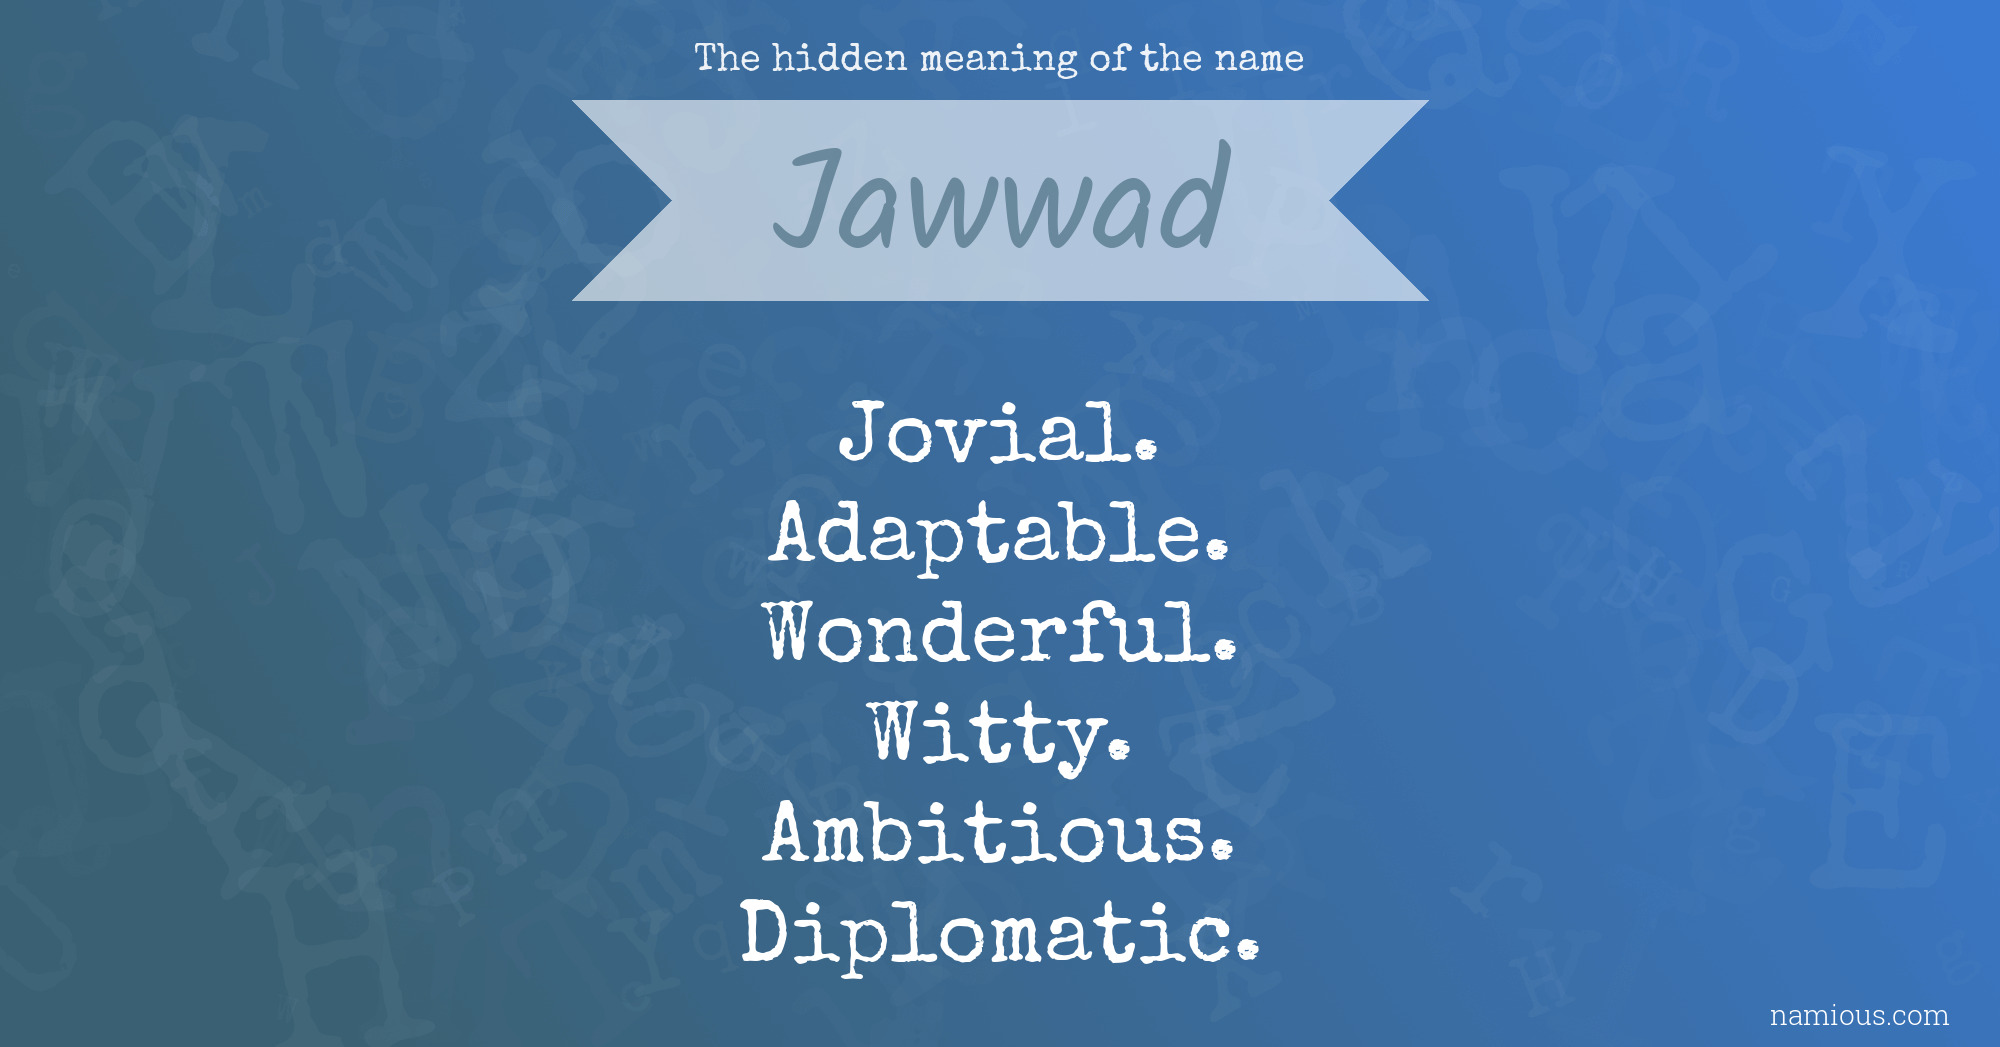 The hidden meaning of the name Jawwad